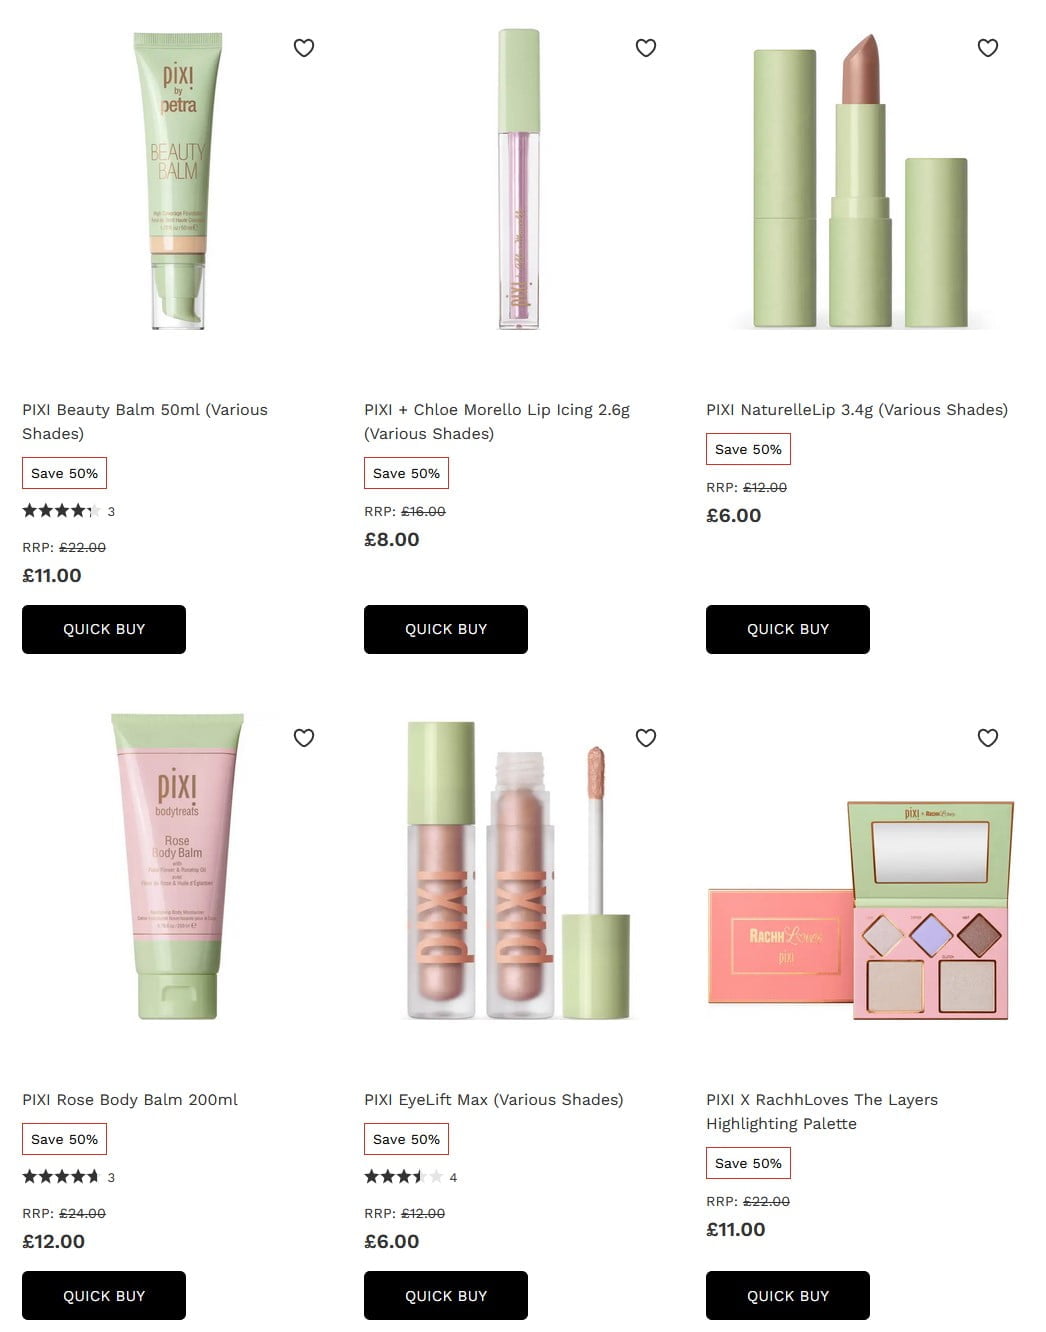 Up to 50% off Pixi at Lookfantastic